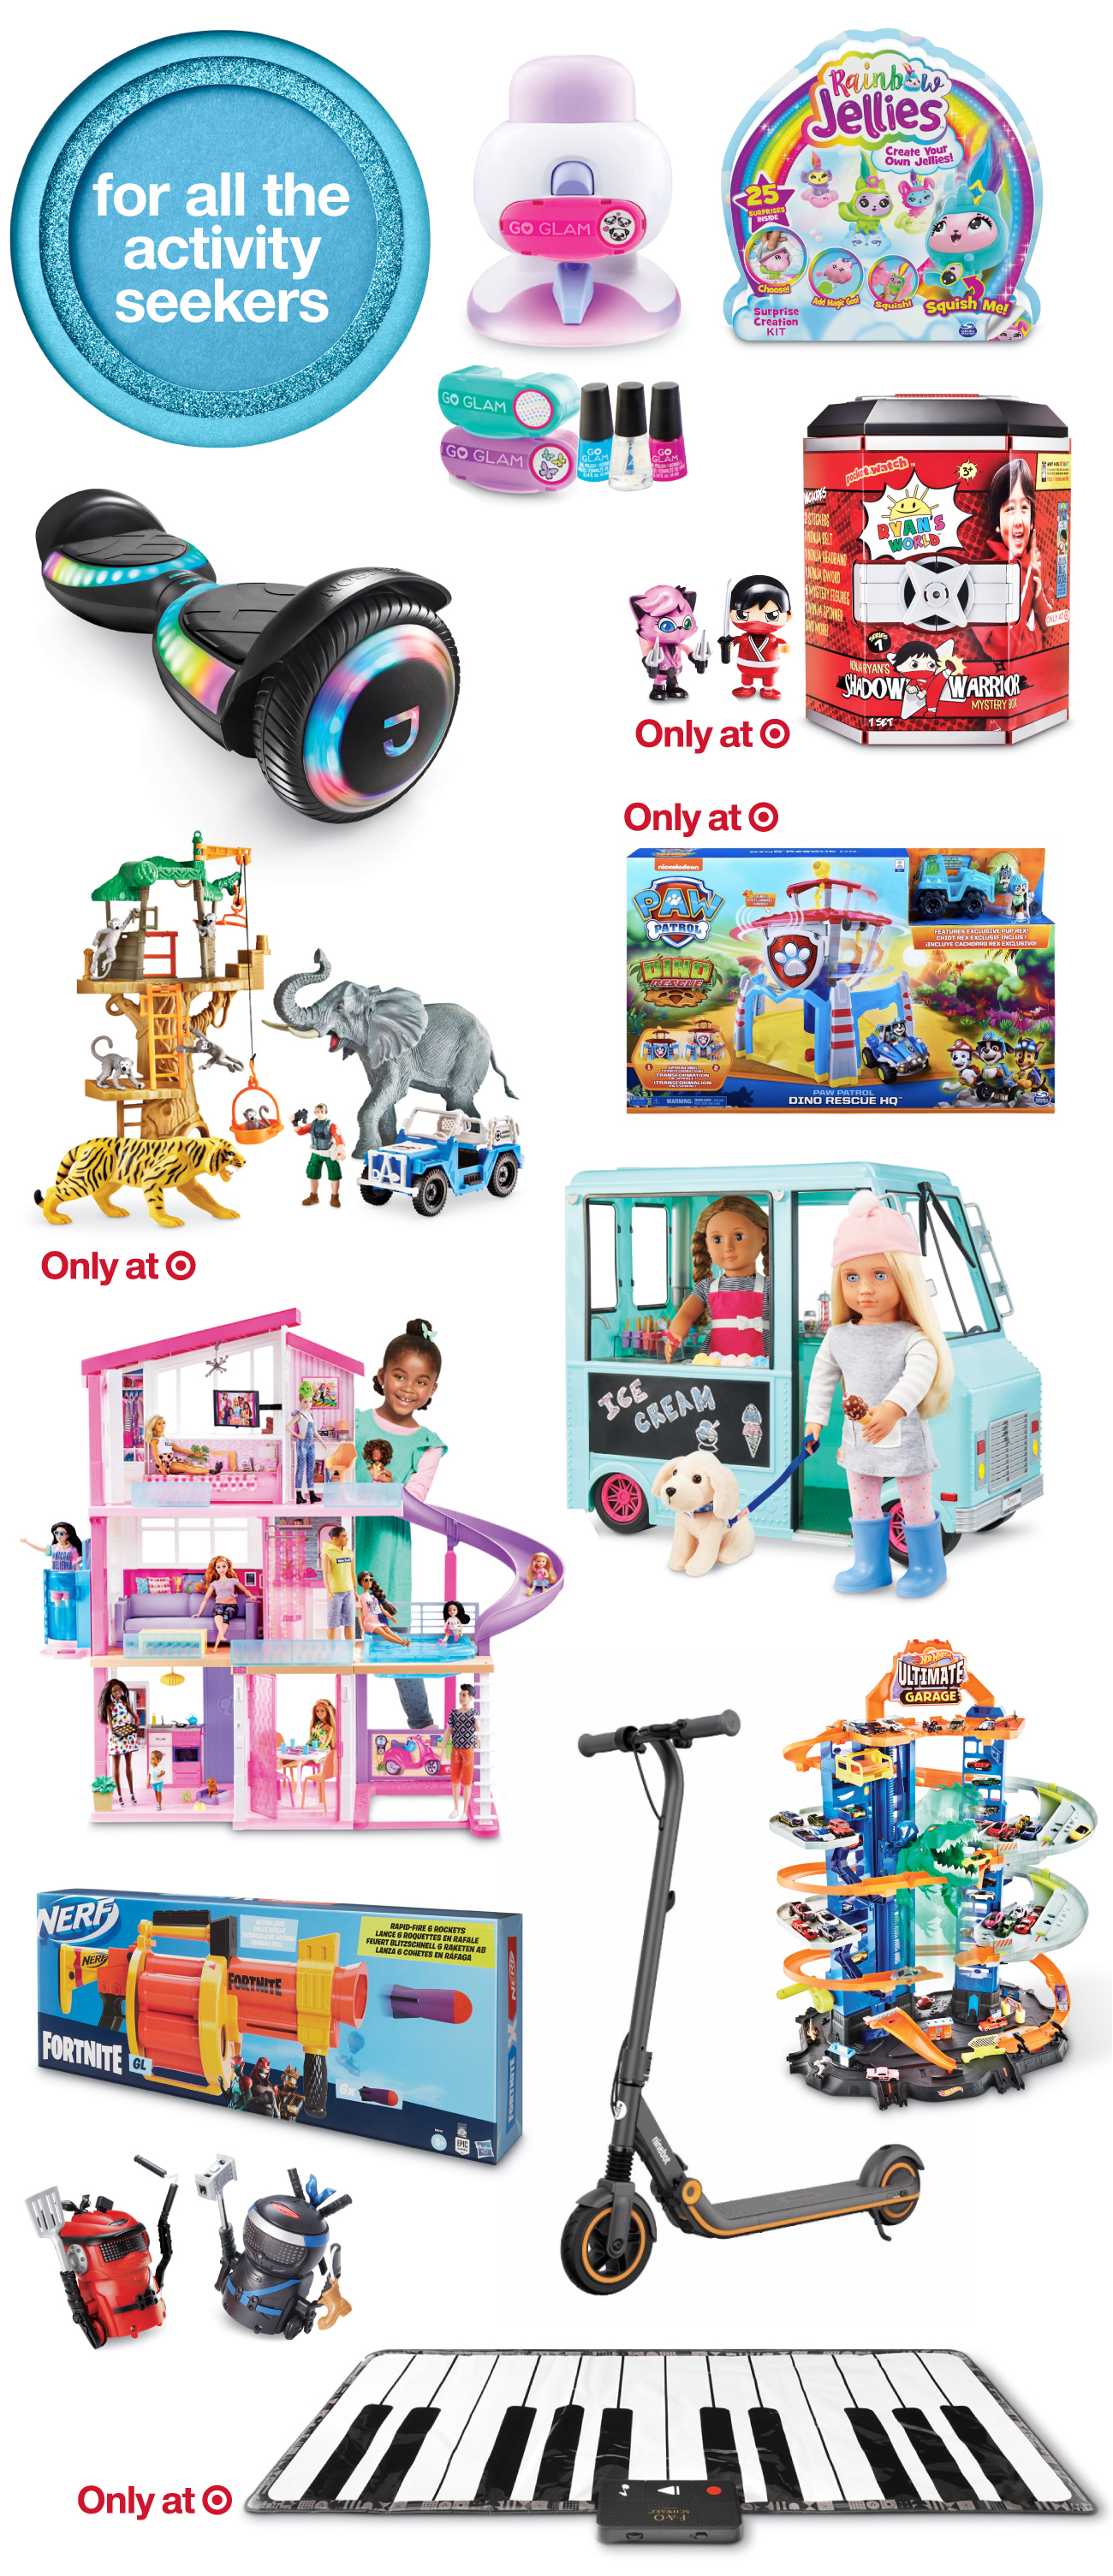 A collage of top toys and games for activity seekers